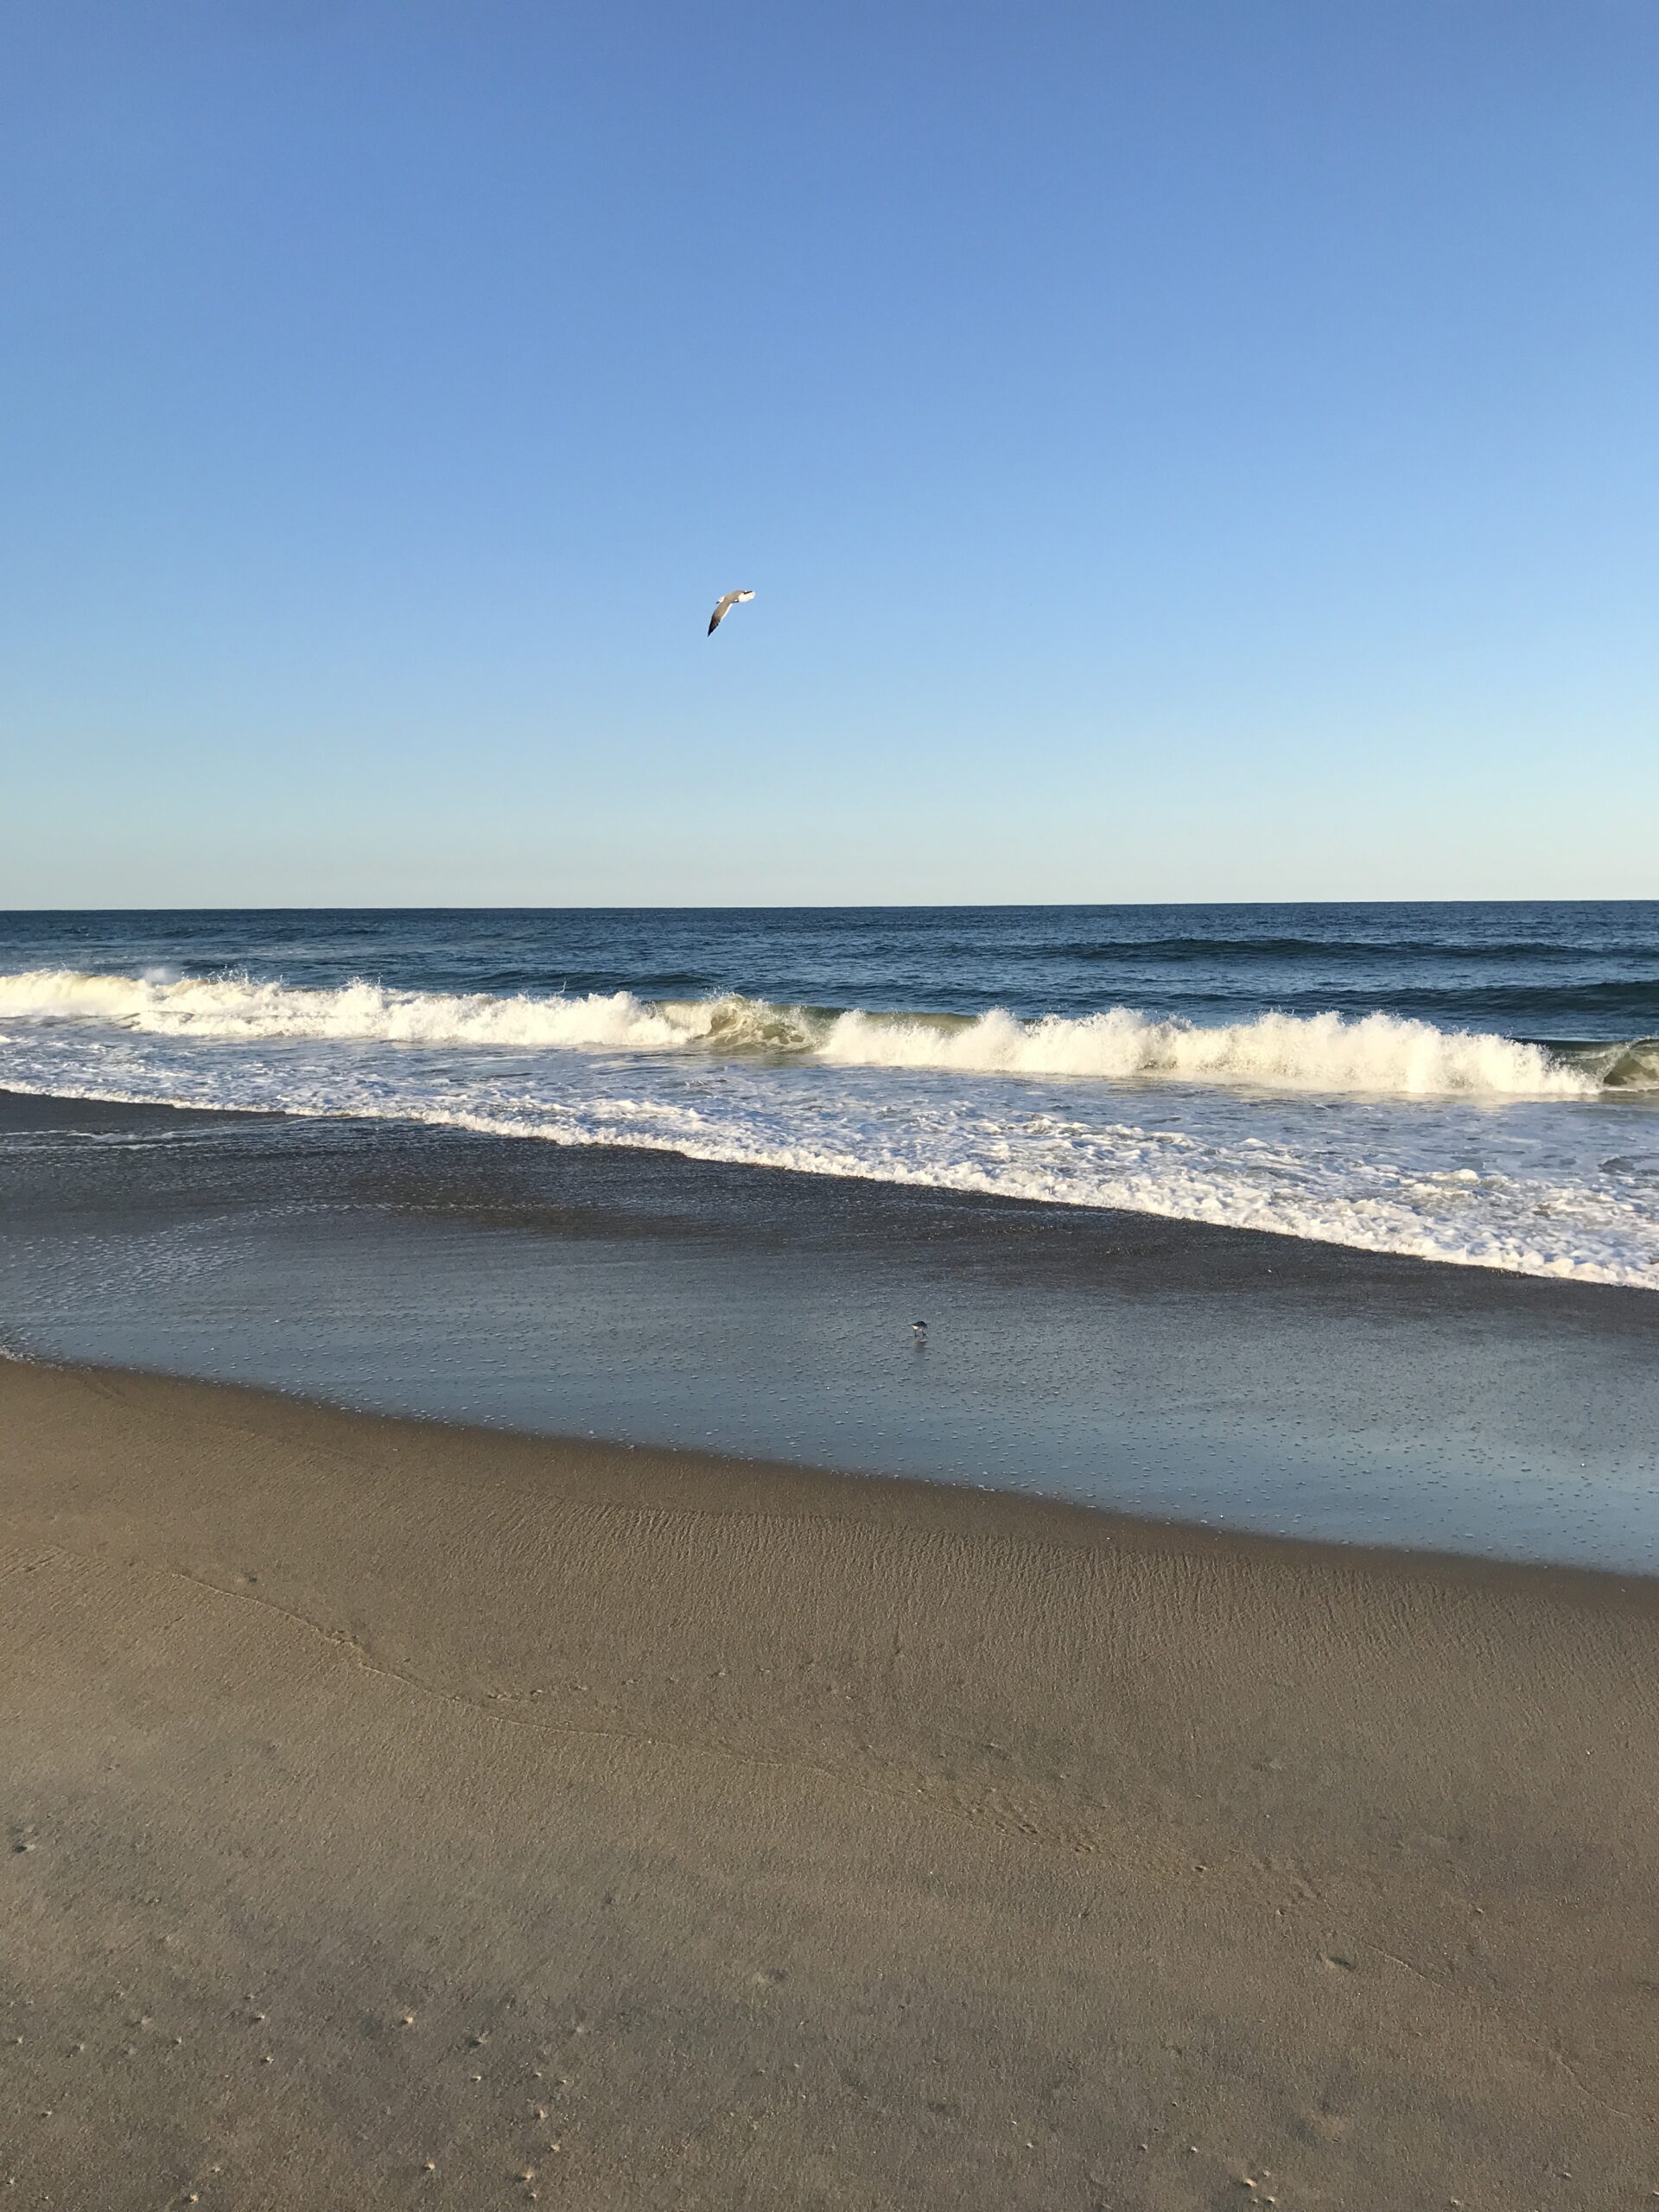 Outer Banks surf fishing